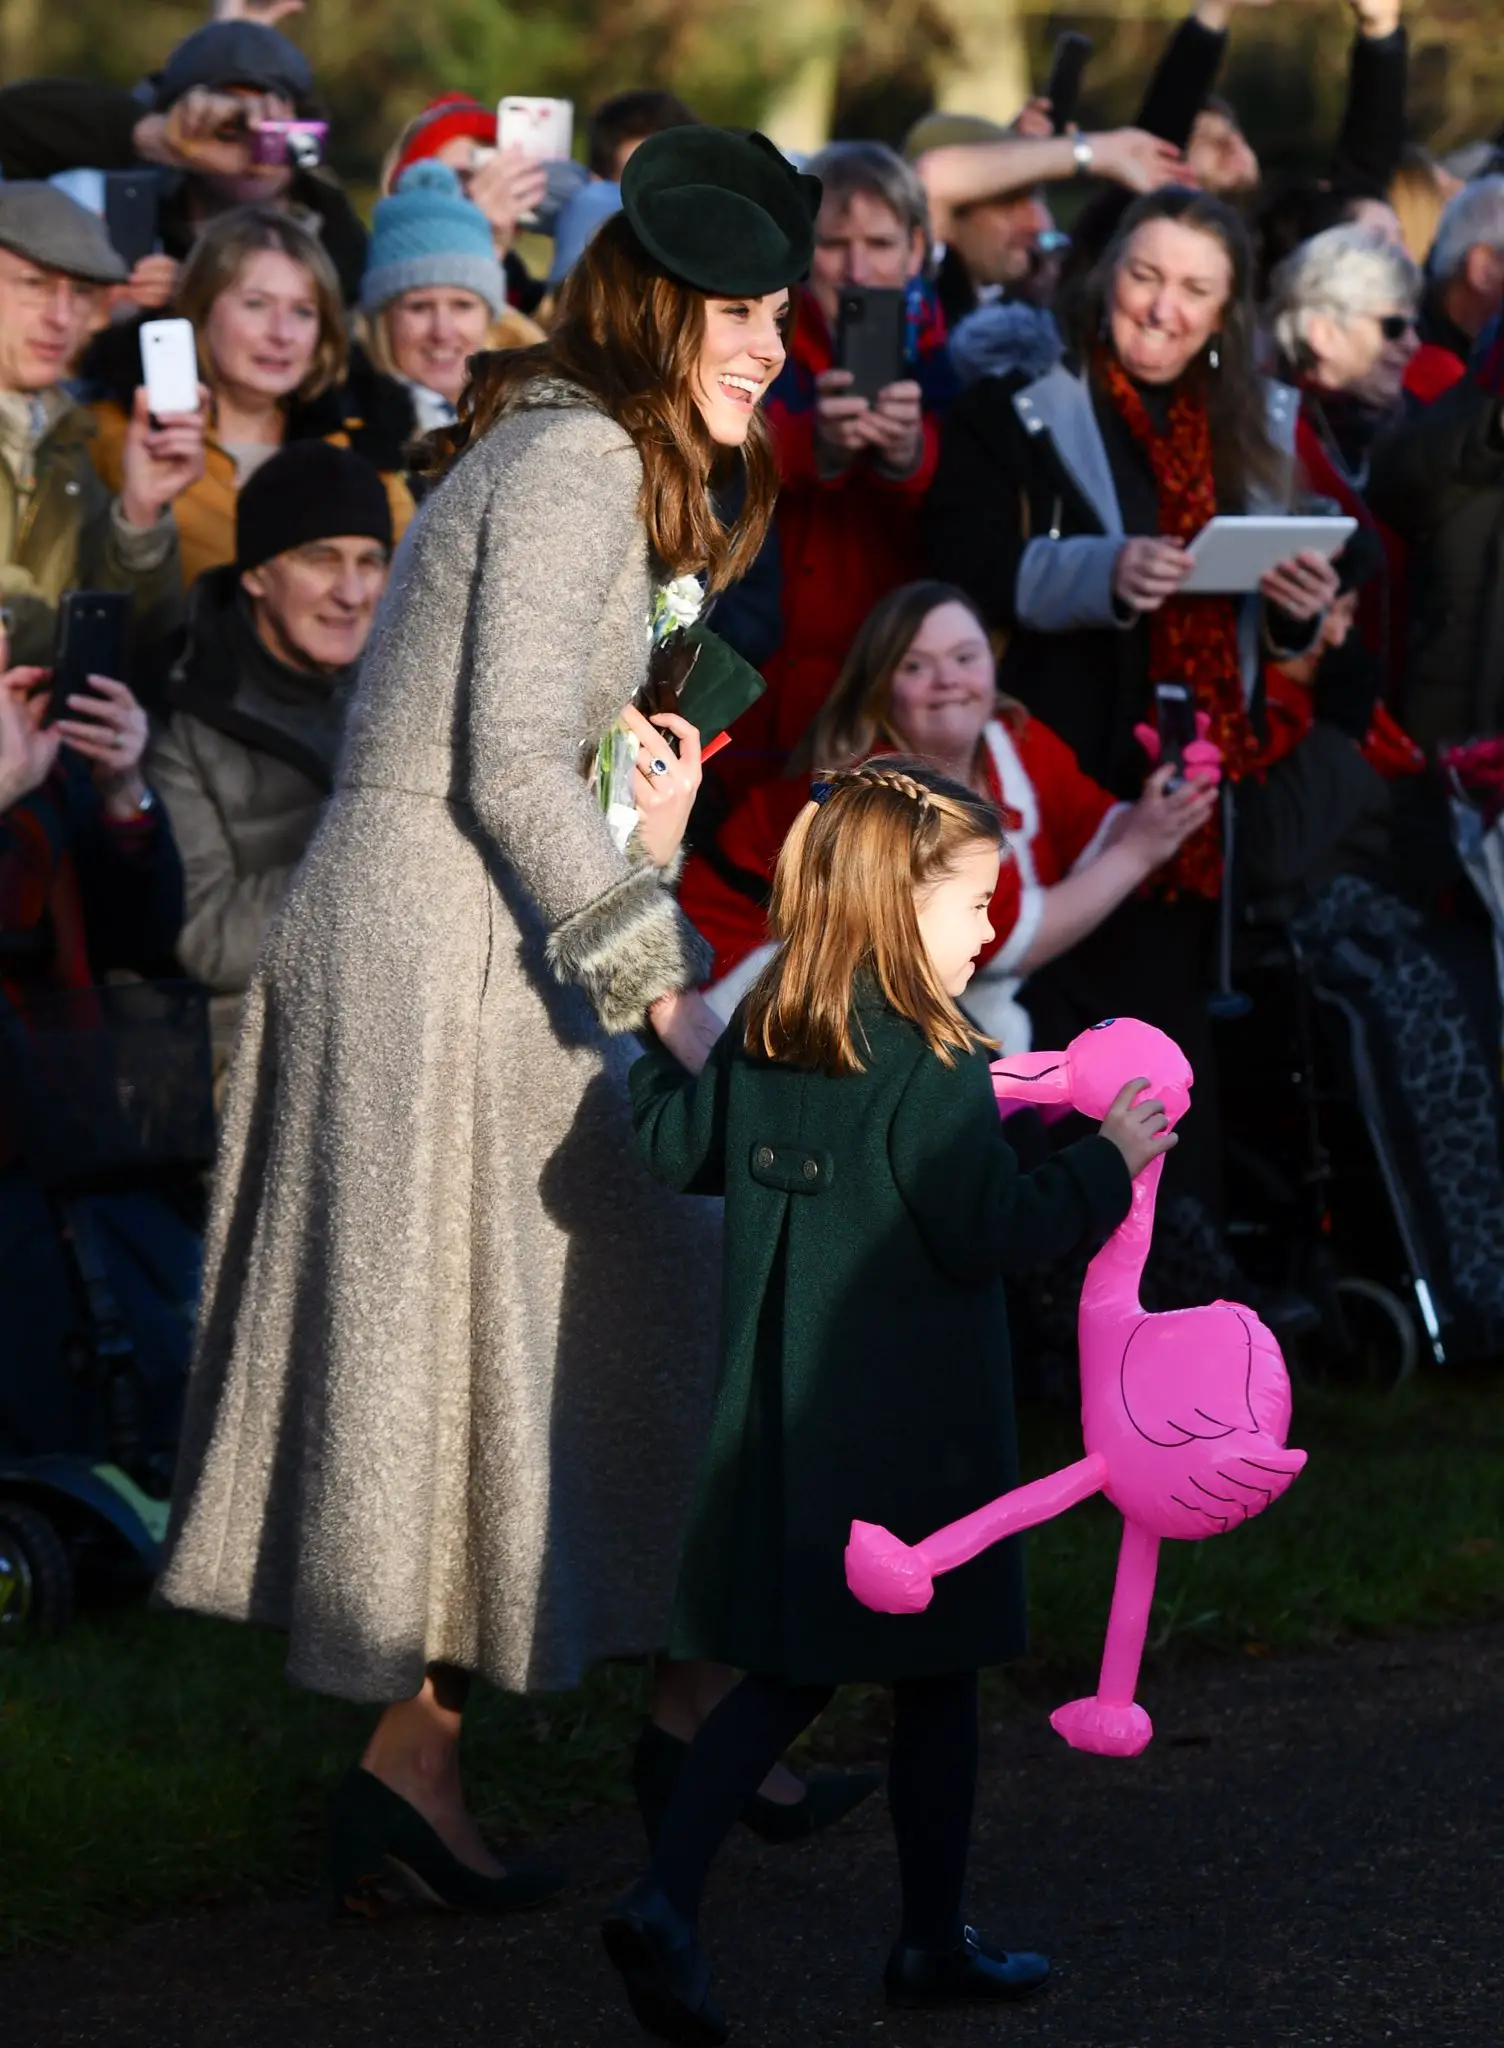 little Charlotte was presented with an inflatable pink flamingo